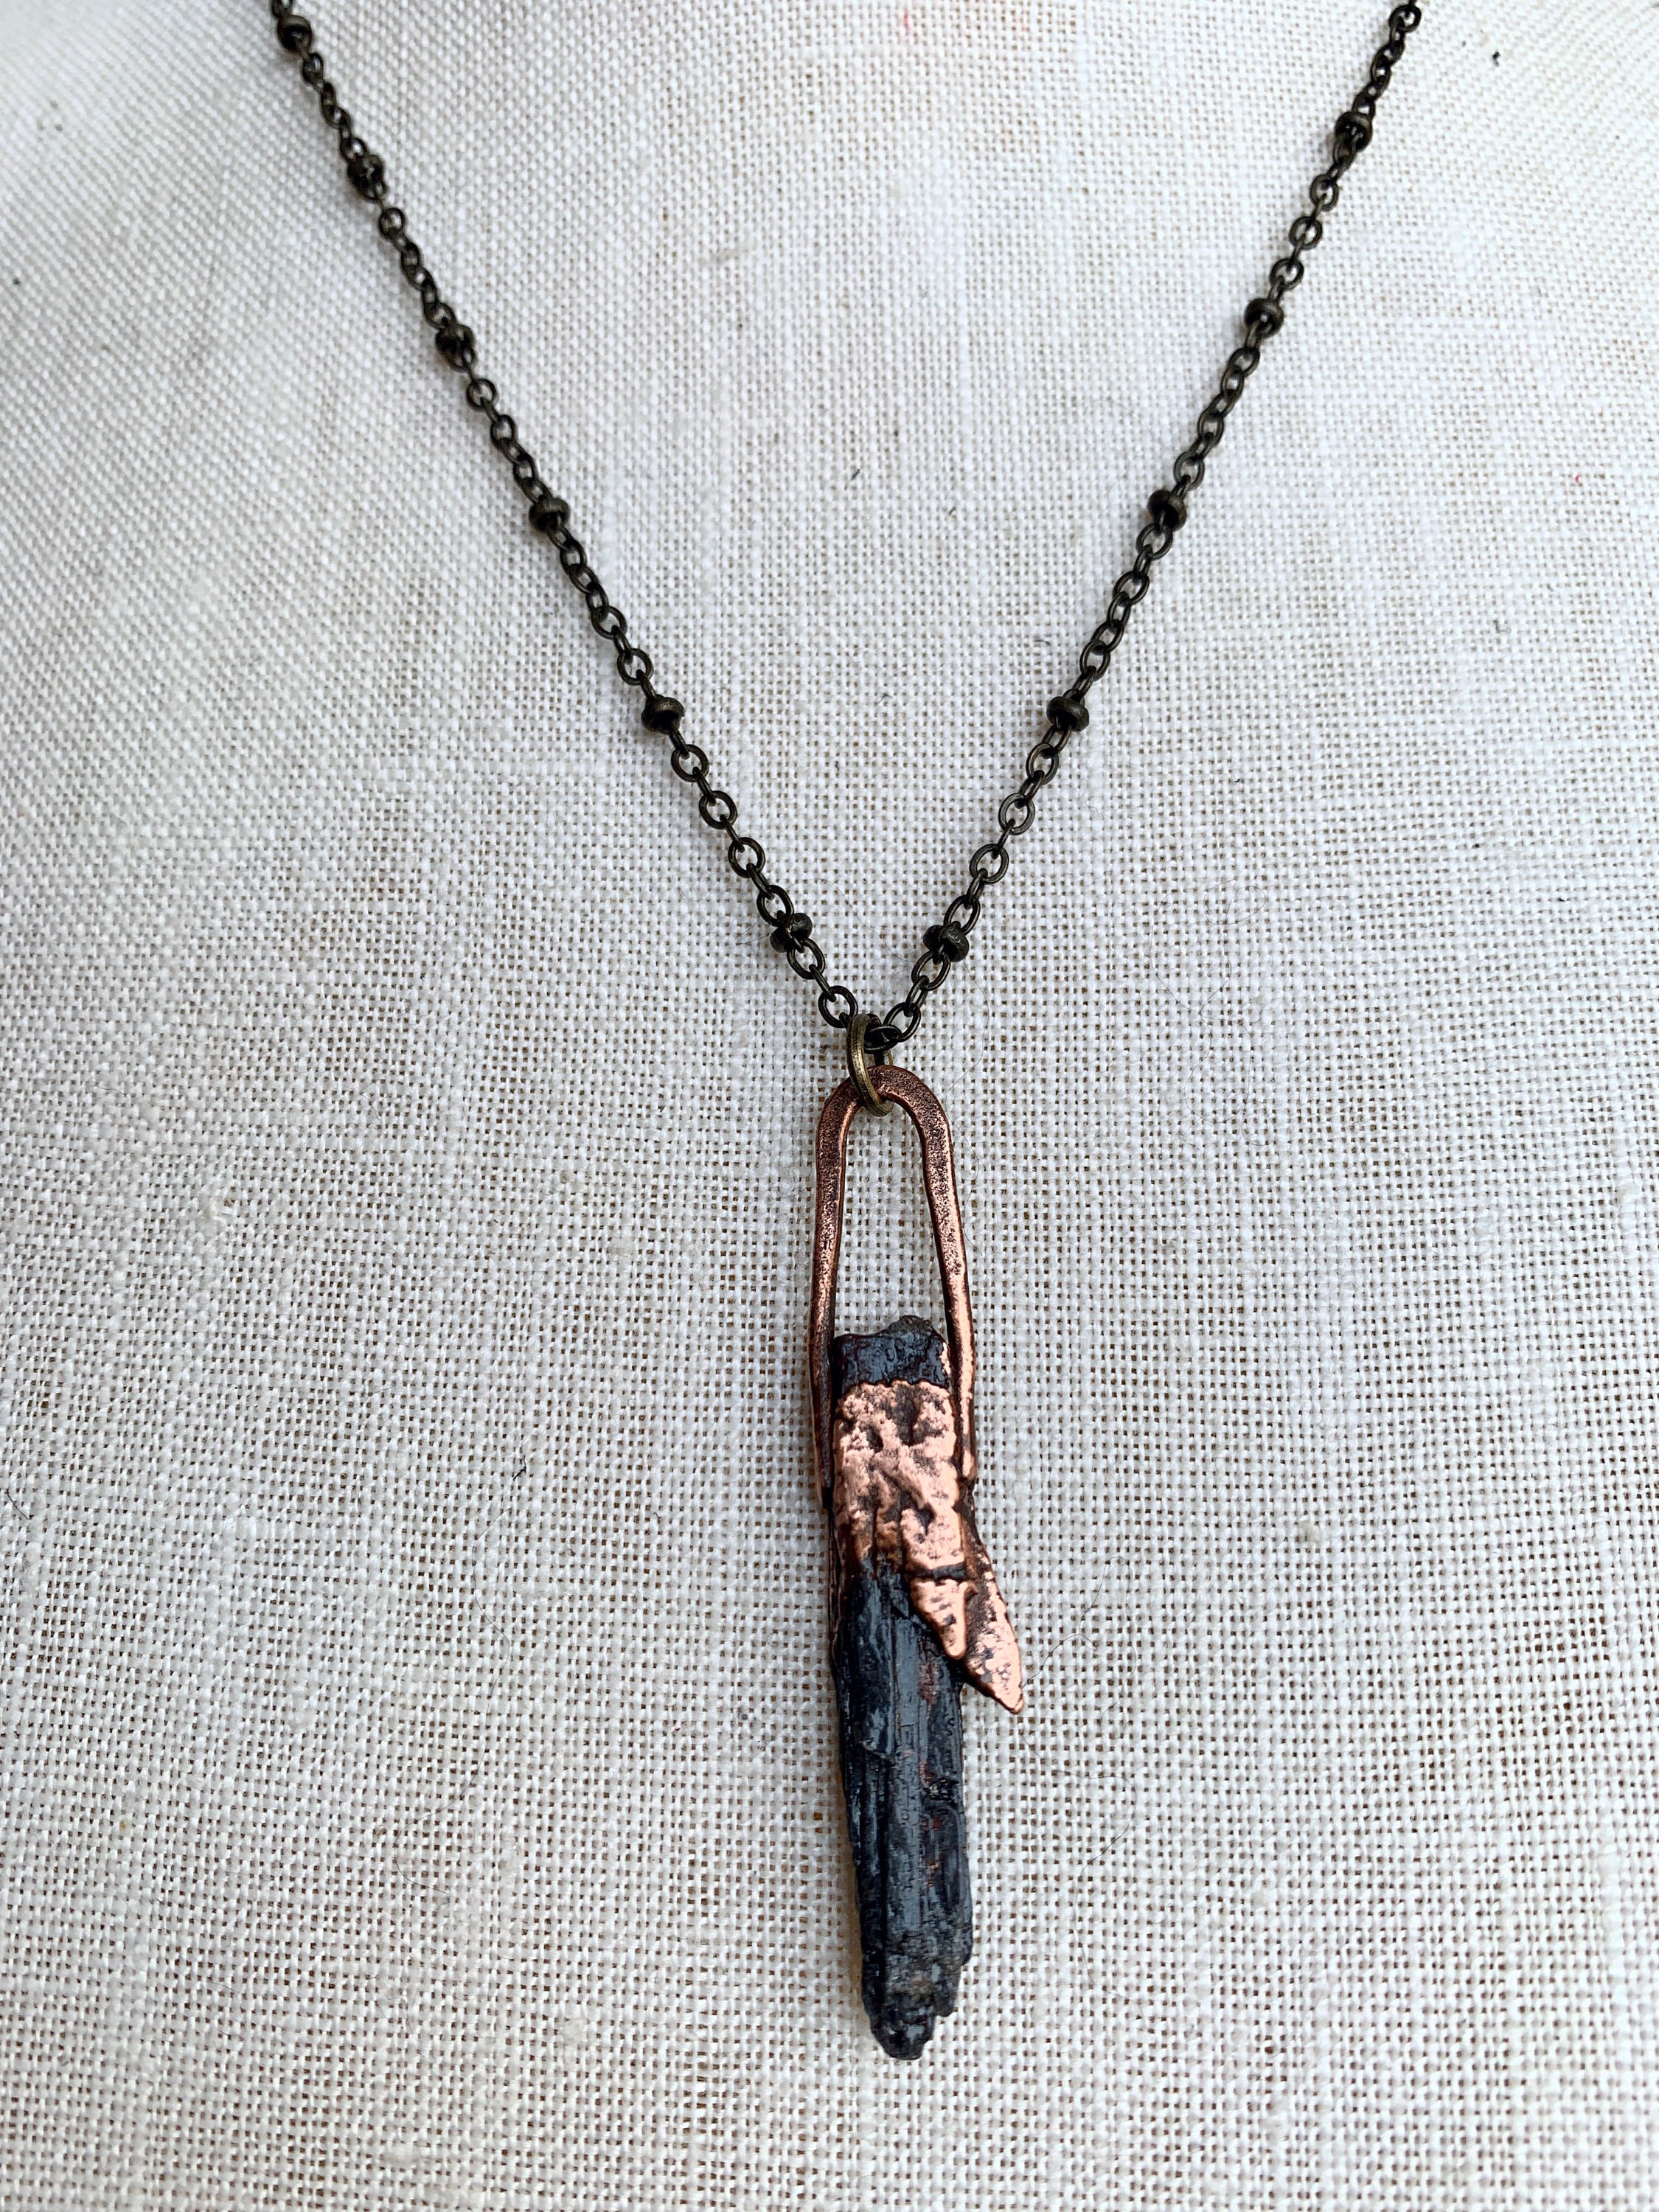 Electroformed Necklace, Electroformed jewelry, kyanite Necklace, Copper ...